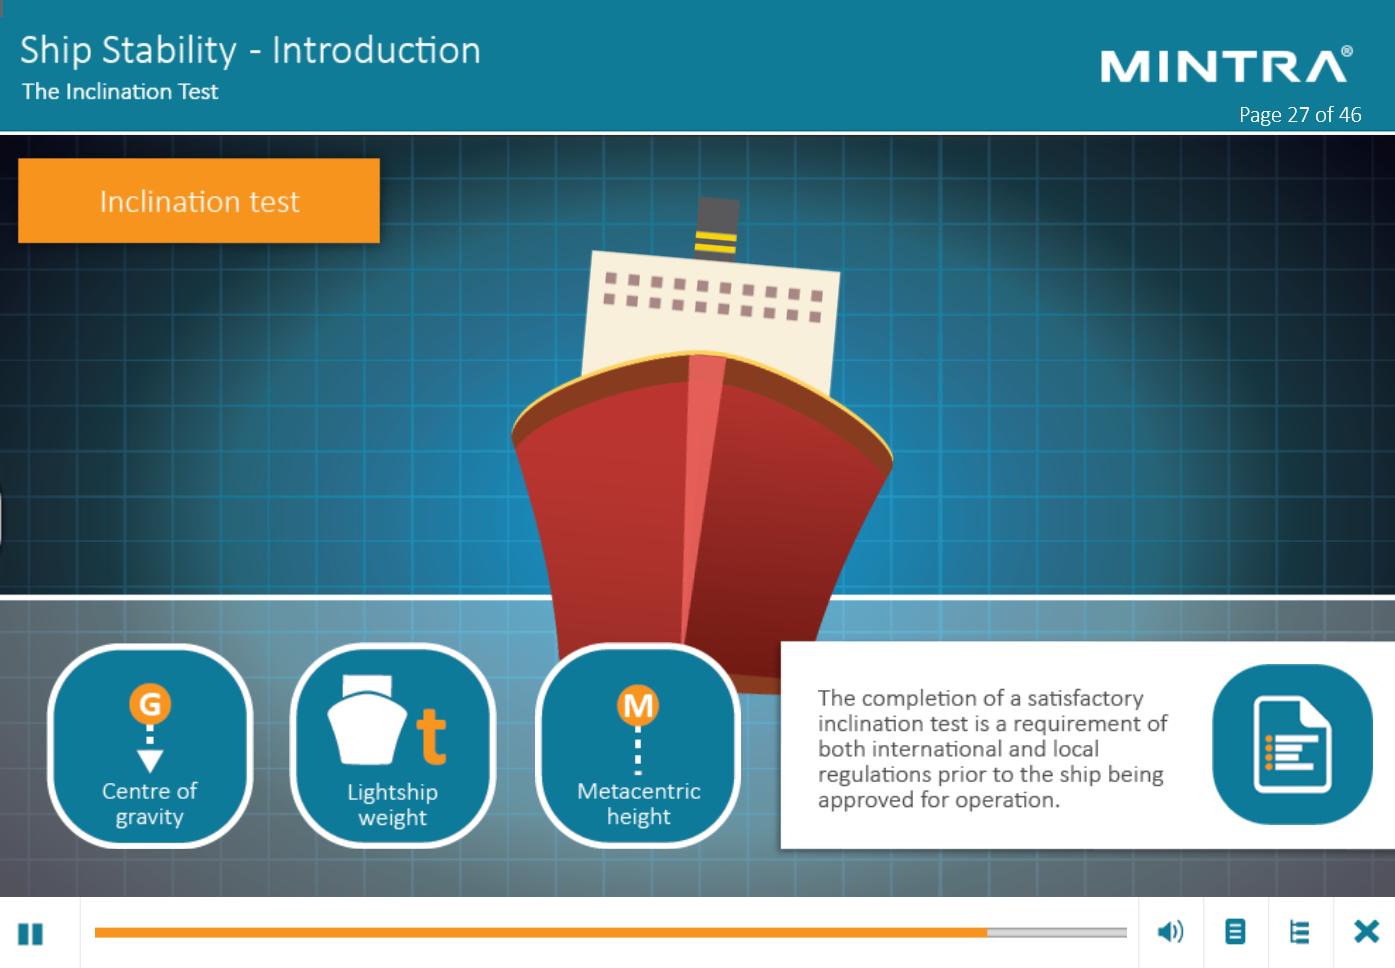 Ship Stability - Introduction (Maritime) Training